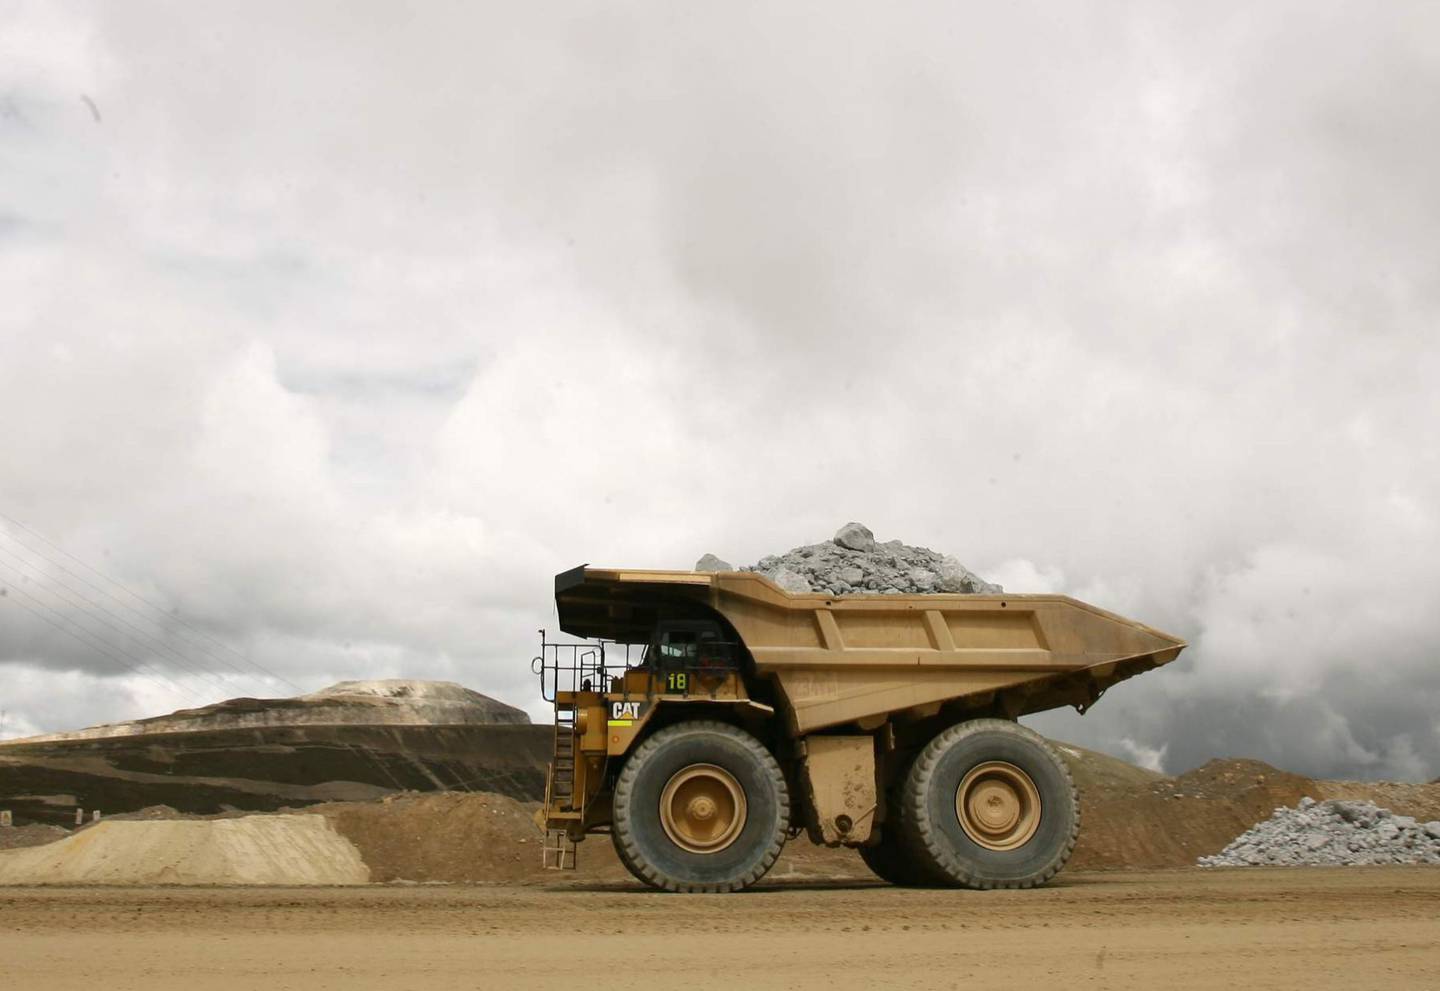 Australia ansd Canada top the ranking in terms of their mining sectors' competitiveness, while Peru ranks bottom out of seven countries, according to a report by Macroconsult and the Peruvian institute of mining engineers (IIMP).